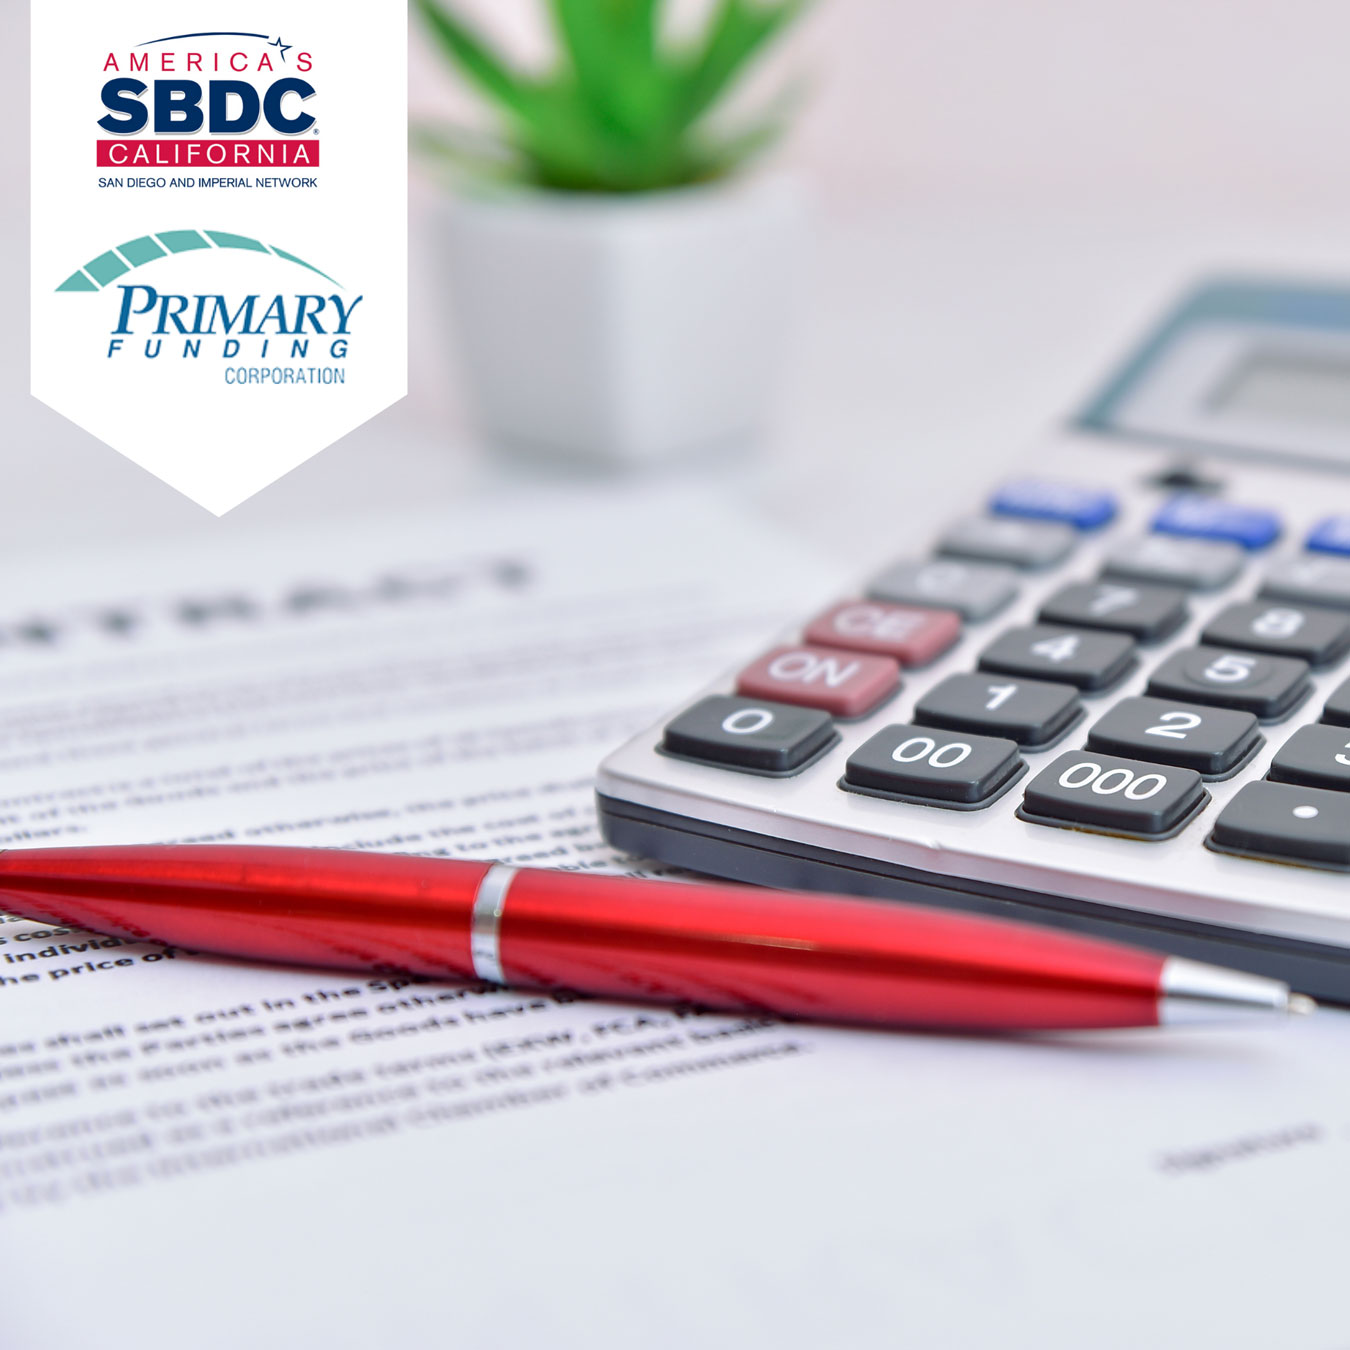 Small Business Resources From the SBDC and Primary Funding